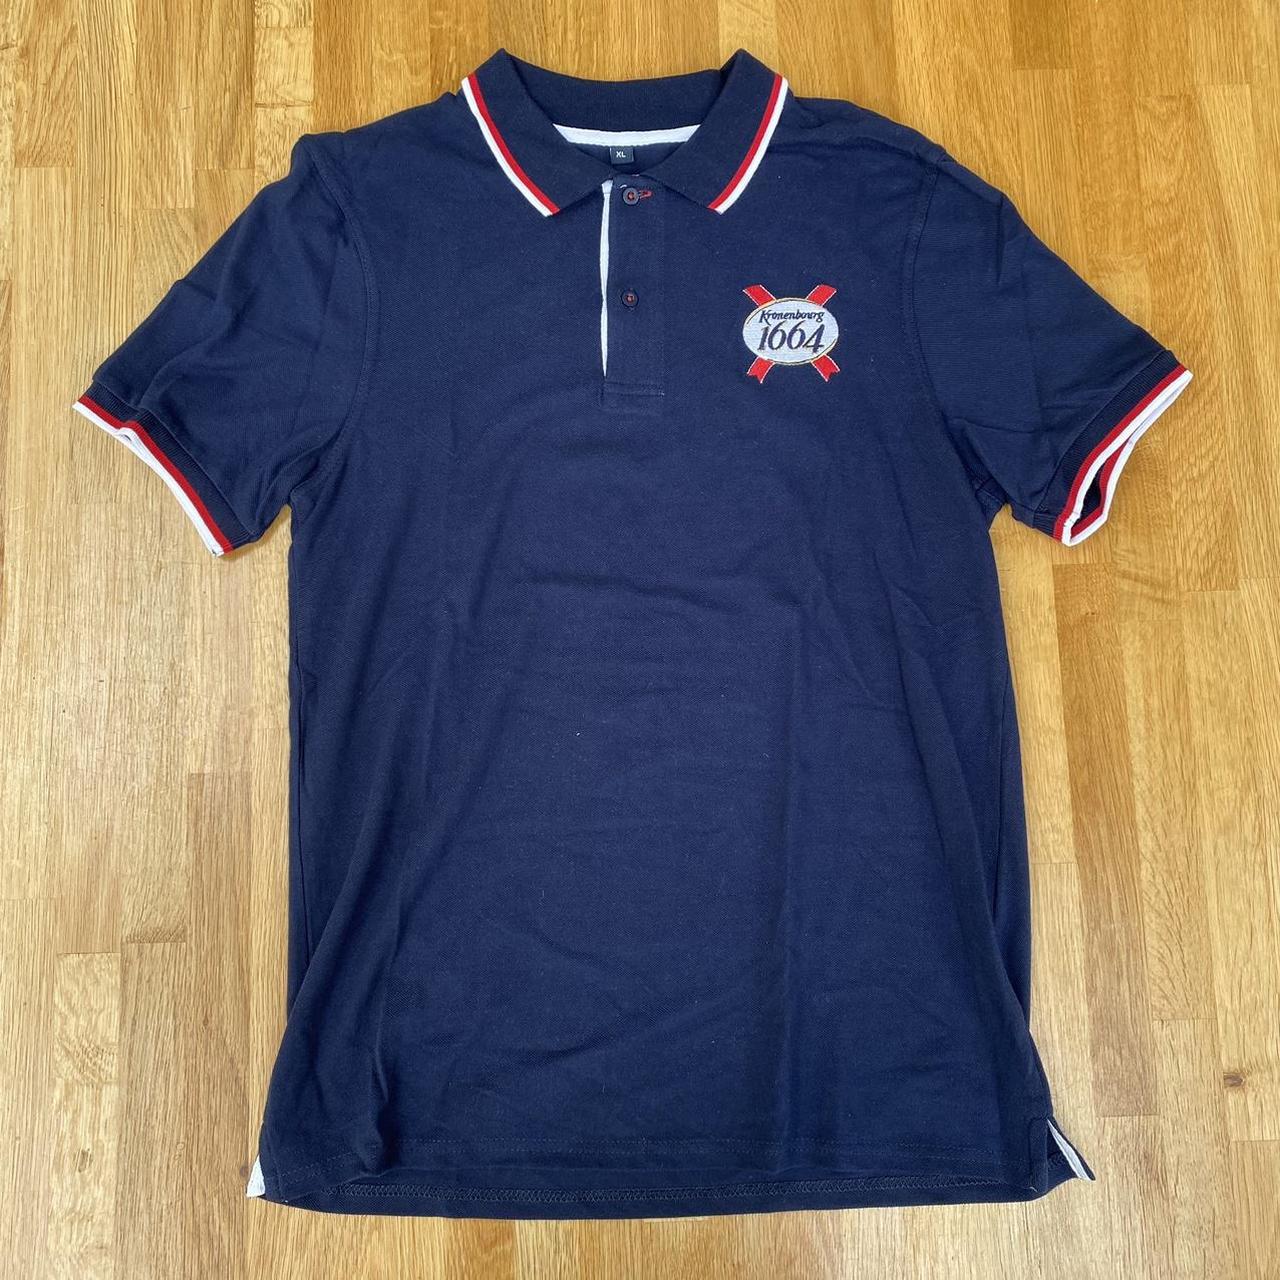 Kronenbourg 1664 branded polo shirt with embroidered... - Depop